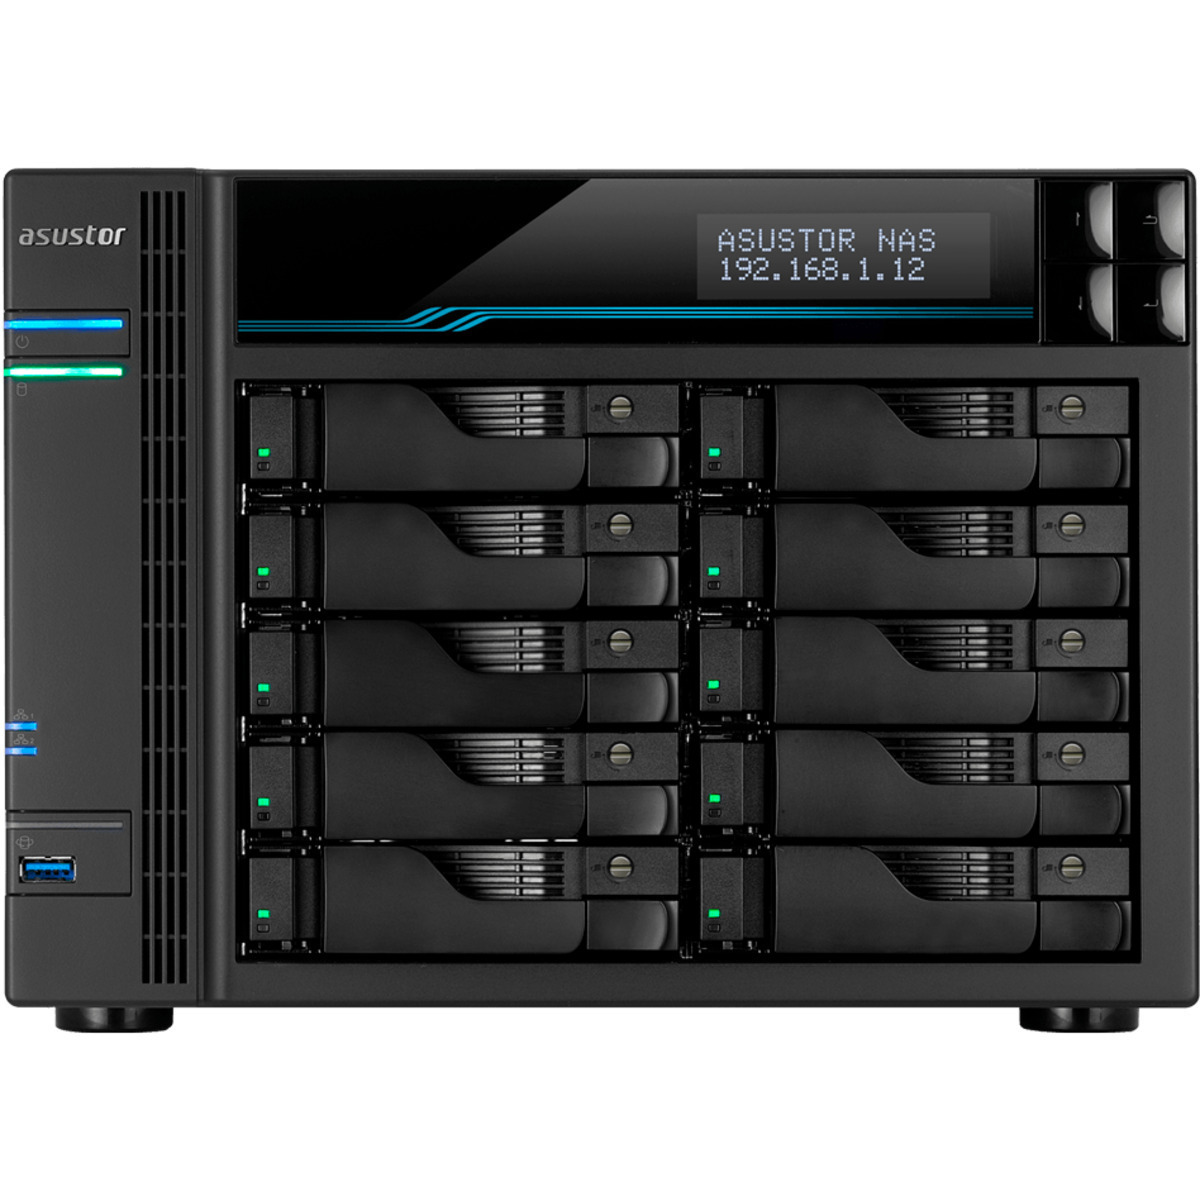 ASUSTOR AS7110T Lockerstor 10 Pro 120tb 10-Bay Desktop Multimedia / Power User / Business NAS - Network Attached Storage Device 6x20tb Western Digital Ultrastar HC560 WUH722020ALE6L4 3.5 7200rpm SATA 6Gb/s HDD ENTERPRISE Class Drives Installed - Burn-In Tested AS7110T Lockerstor 10 Pro